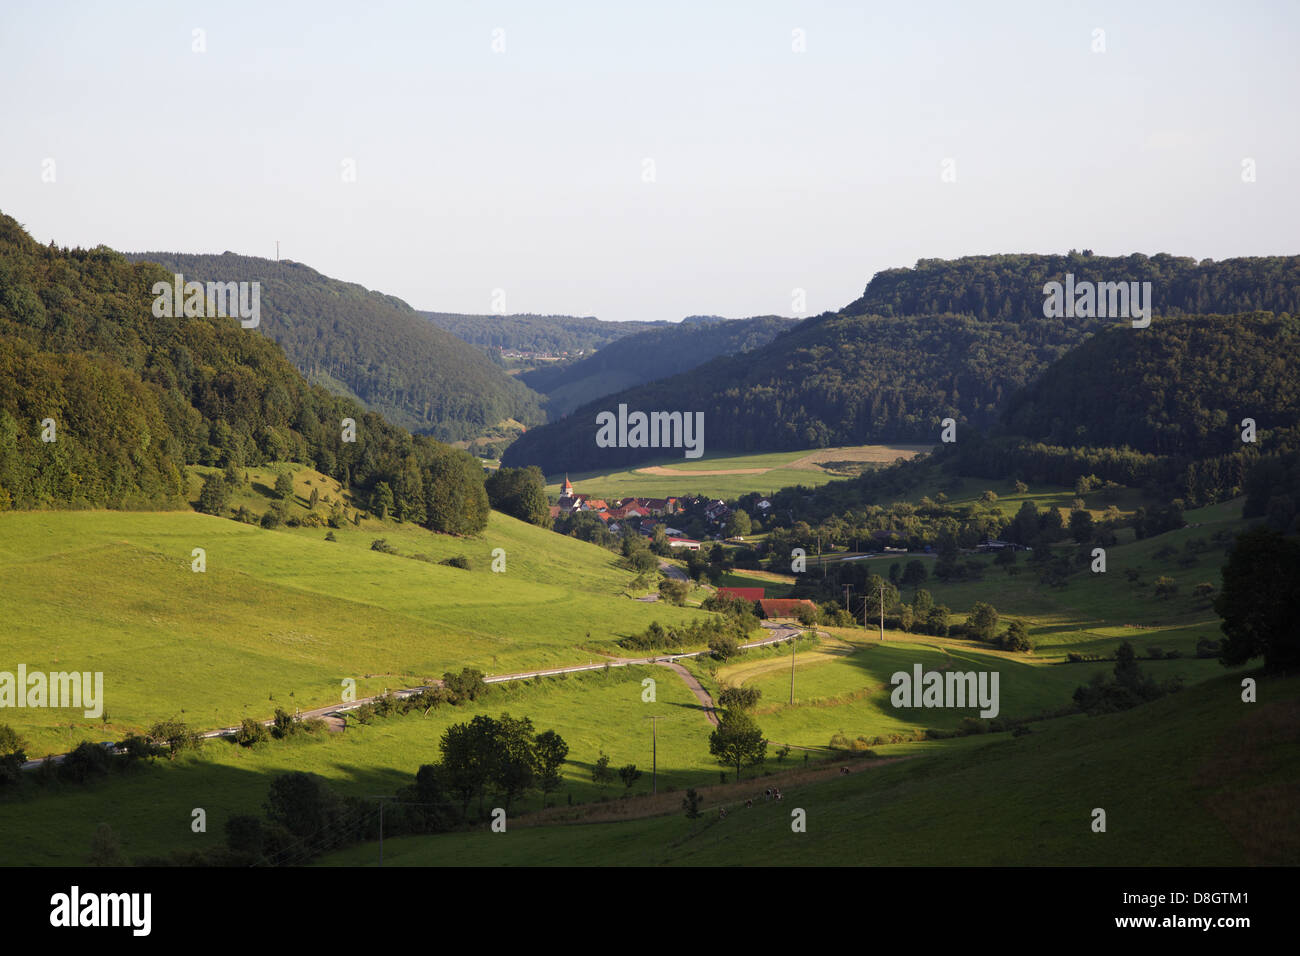 Germany, Baden-Württemberg, Swabian Alb (mountains), epee field, village, street, point of view Stock Photo